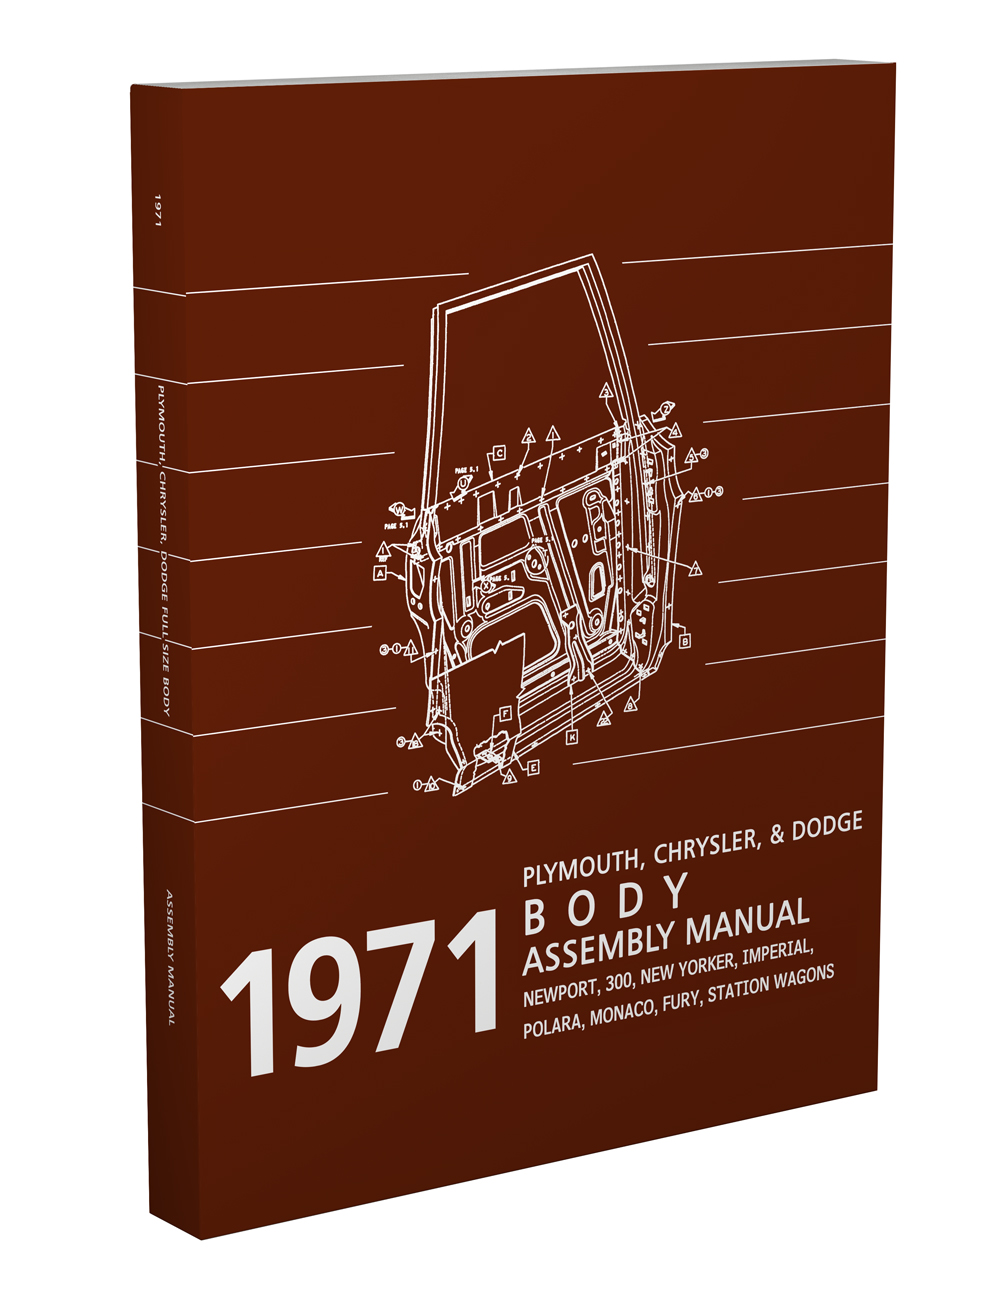 1971 Chrysler, Plymouth, Dodge Body Assembly Manual Reprint